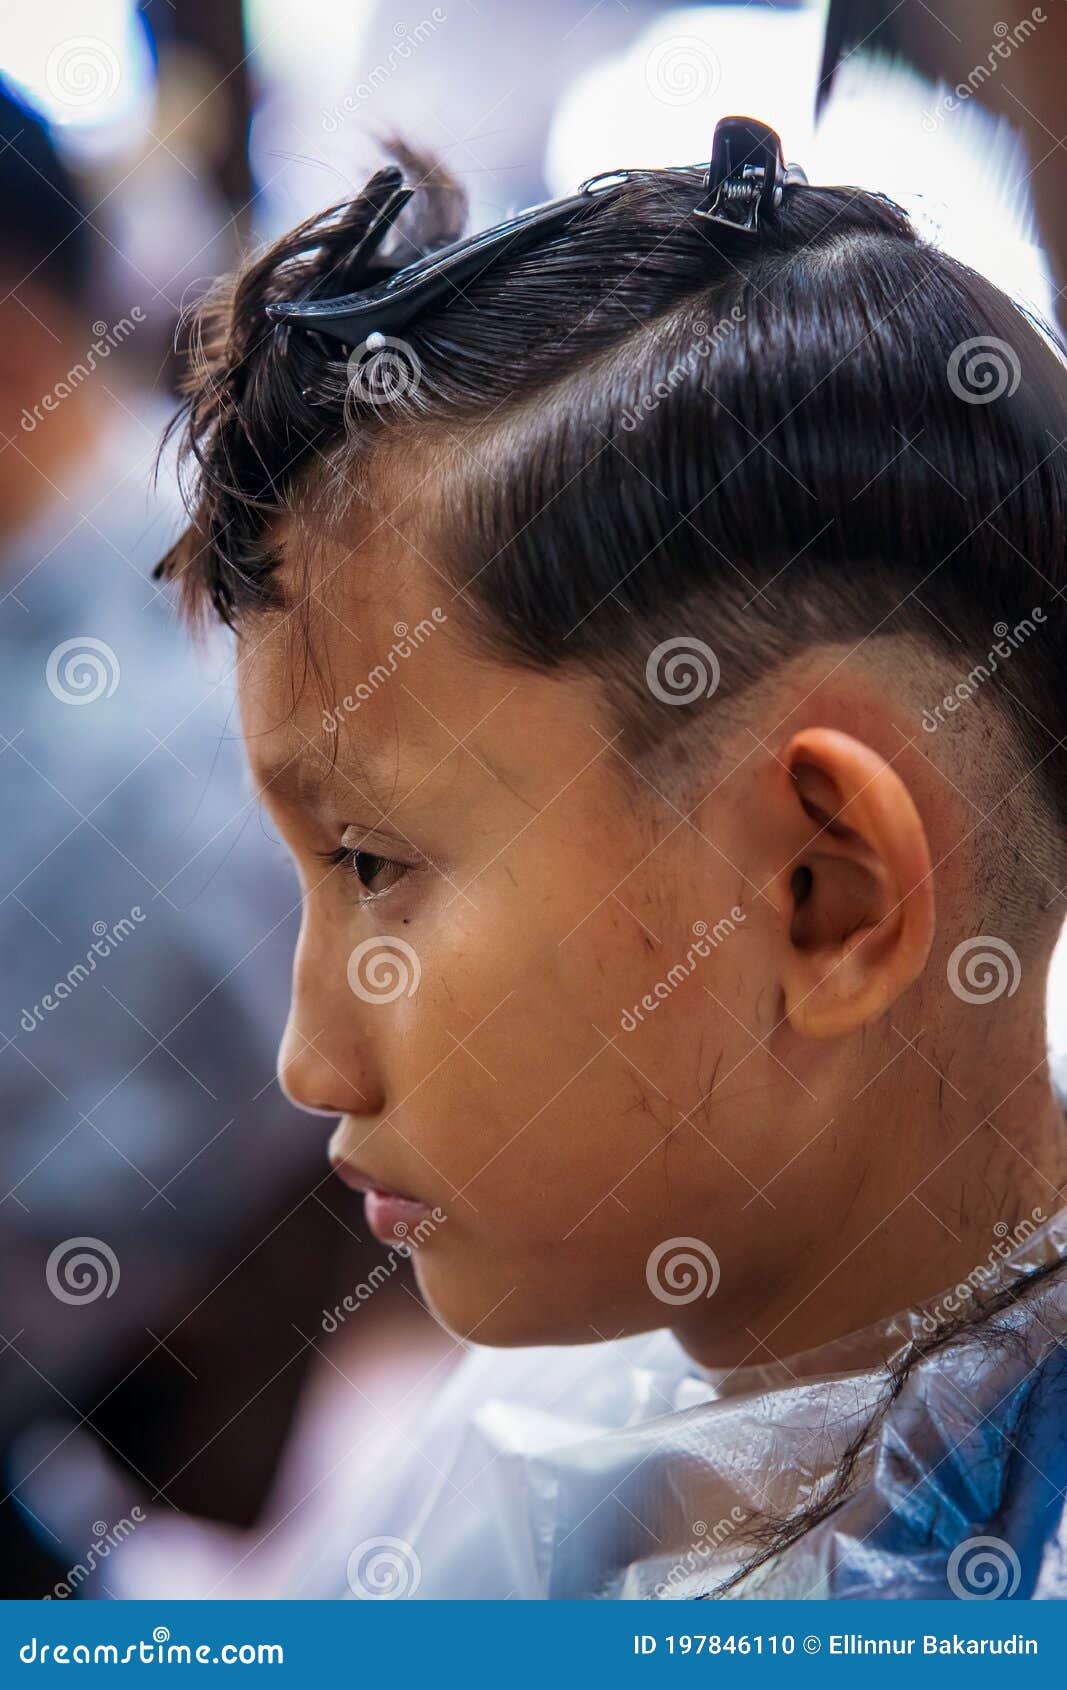 A Young Boy Getting His Hair Cut at Barber Shop, Barber Shop Rear View  Stock Photo - Image of clipper, background: 197846110